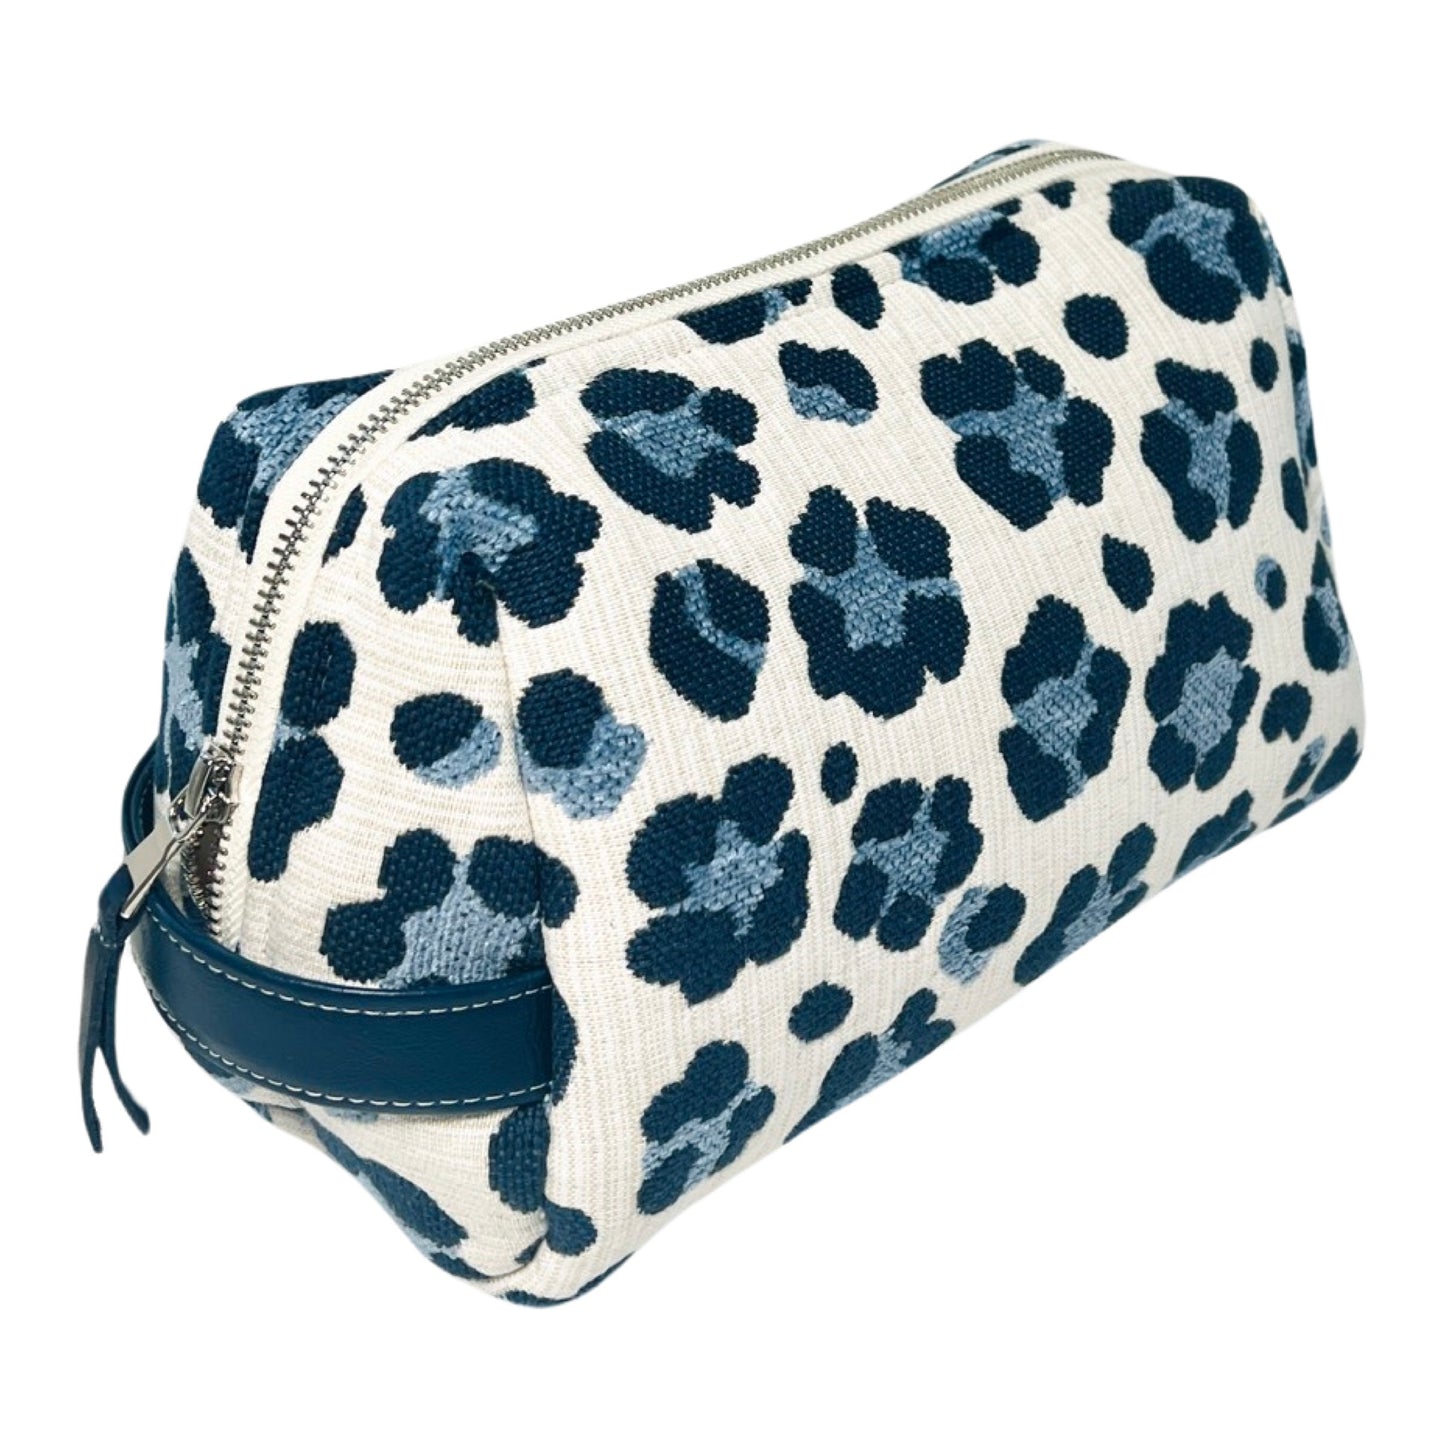 Trixie Leopard Toiletry Bag in Navy